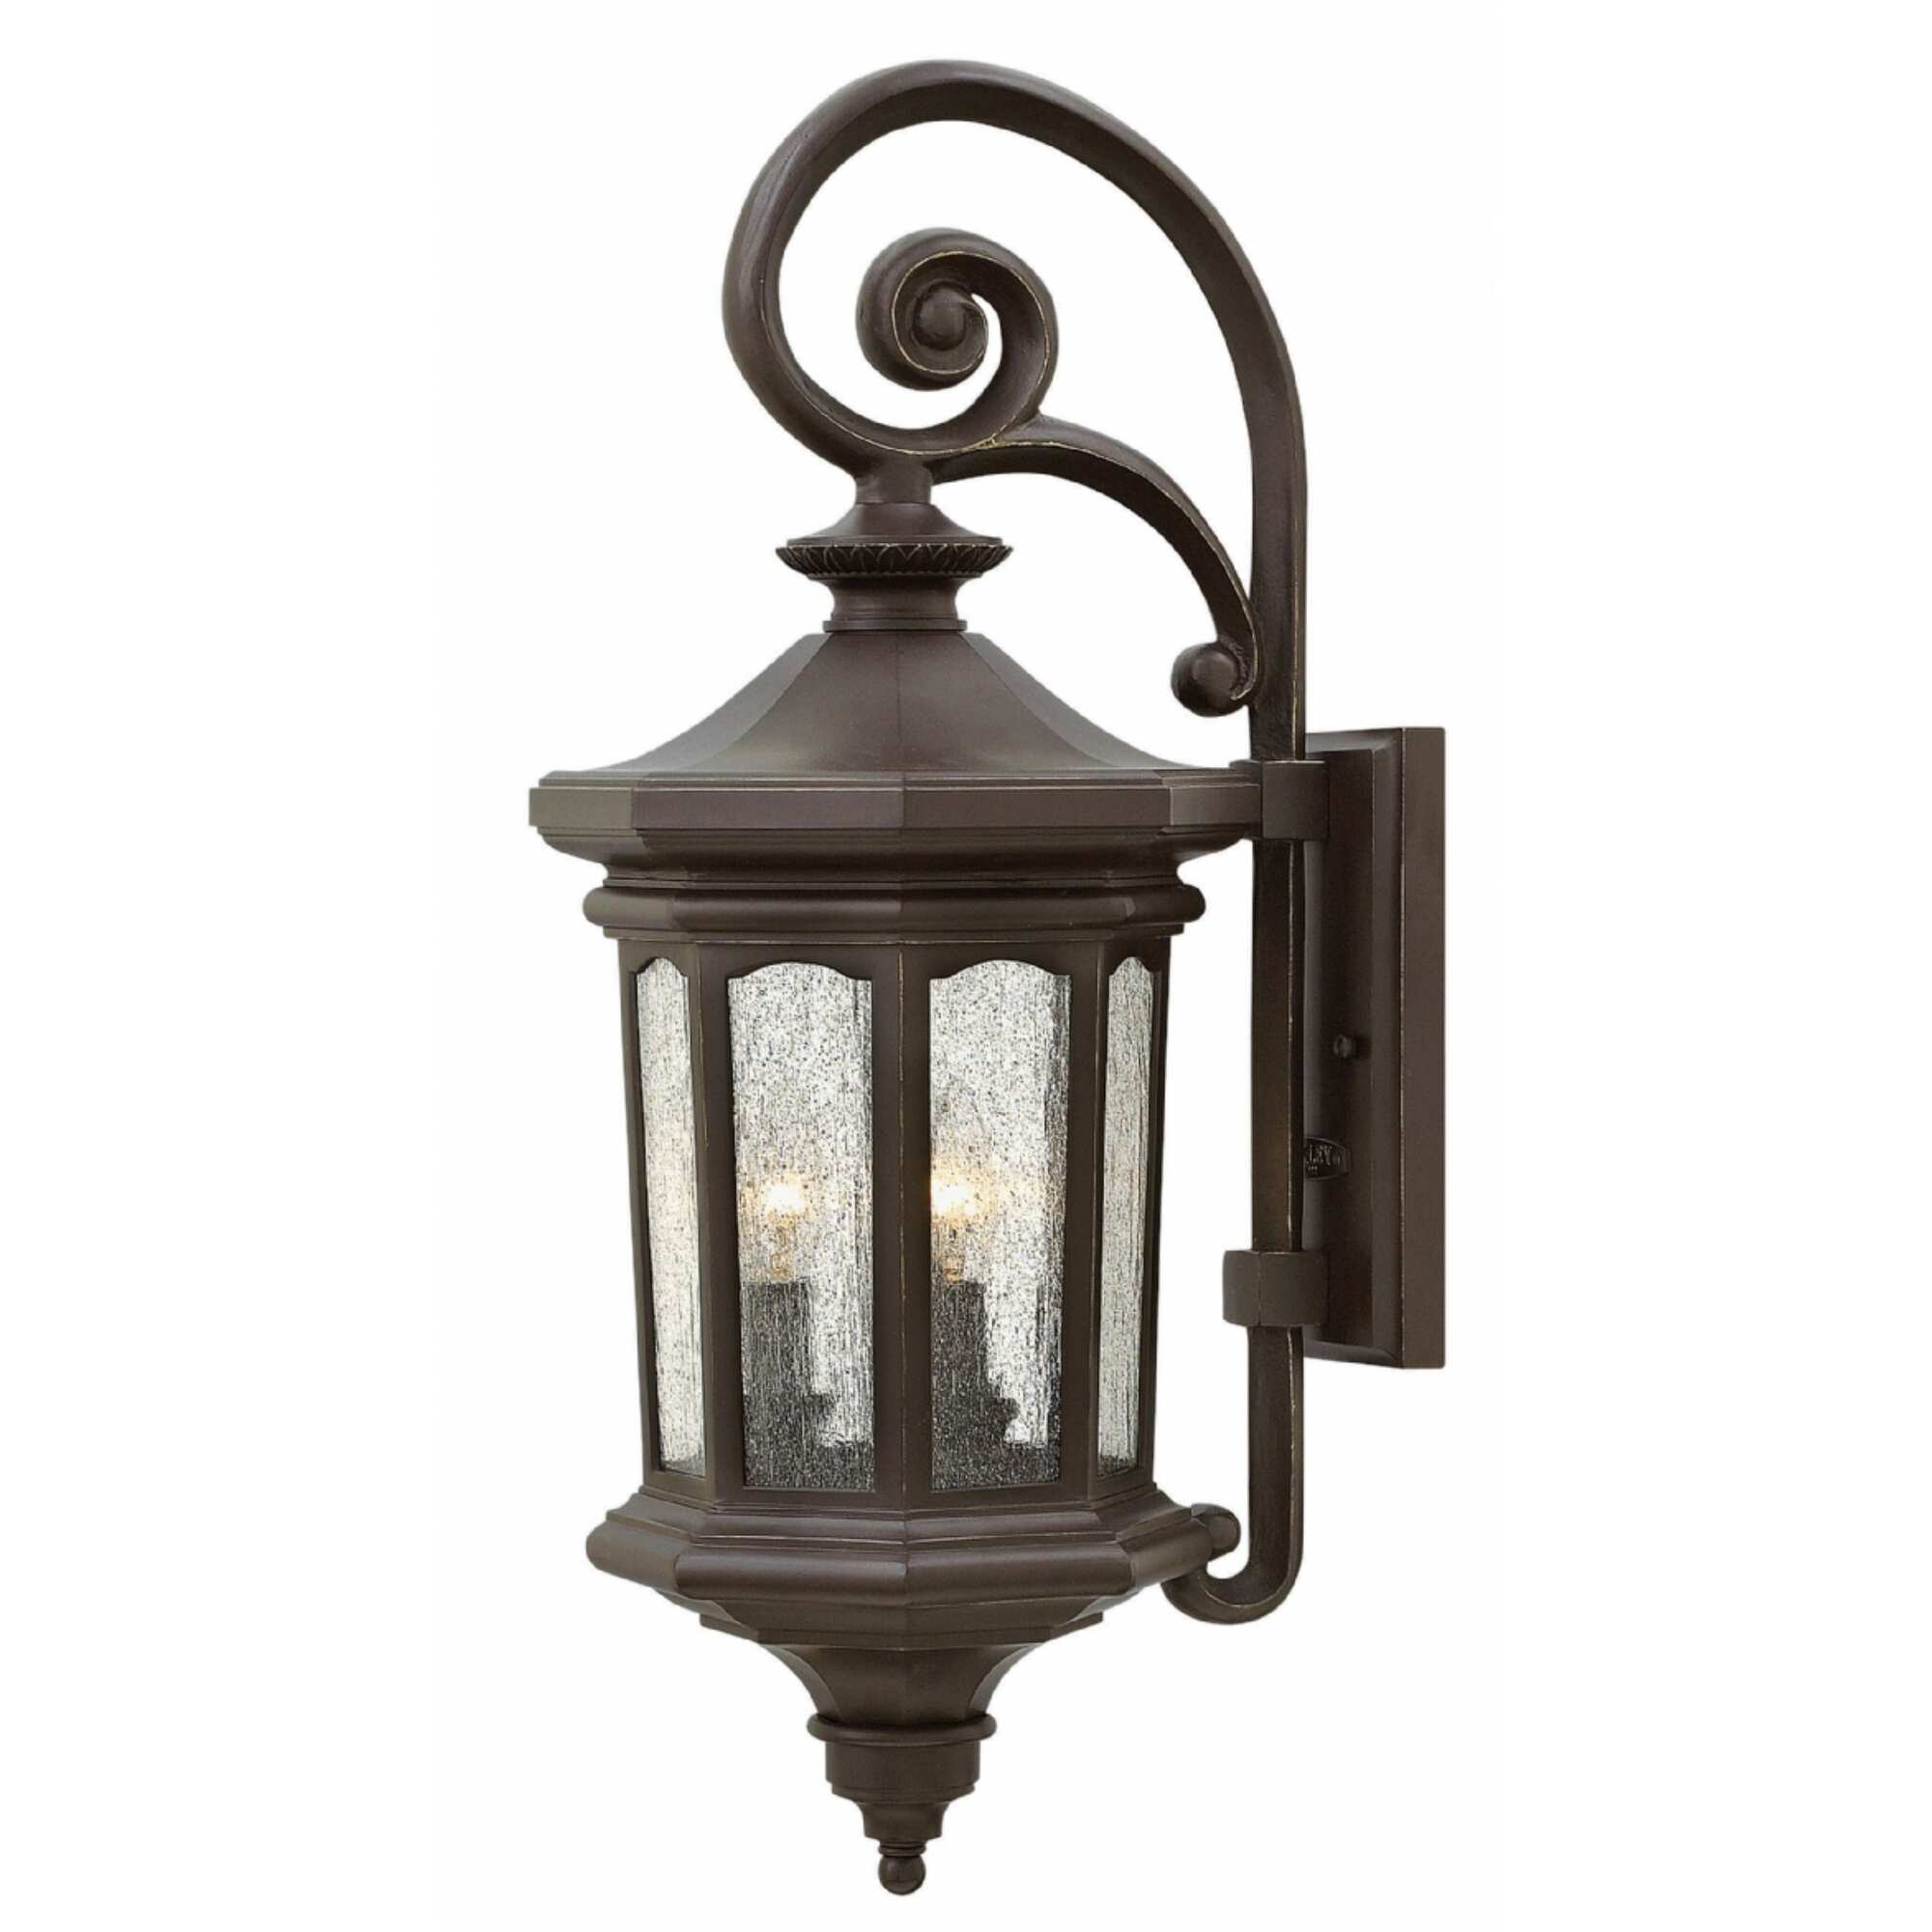 Hinkley Raley 3-Light Outdoor Wall Mount in Oil Rubbed Bronze